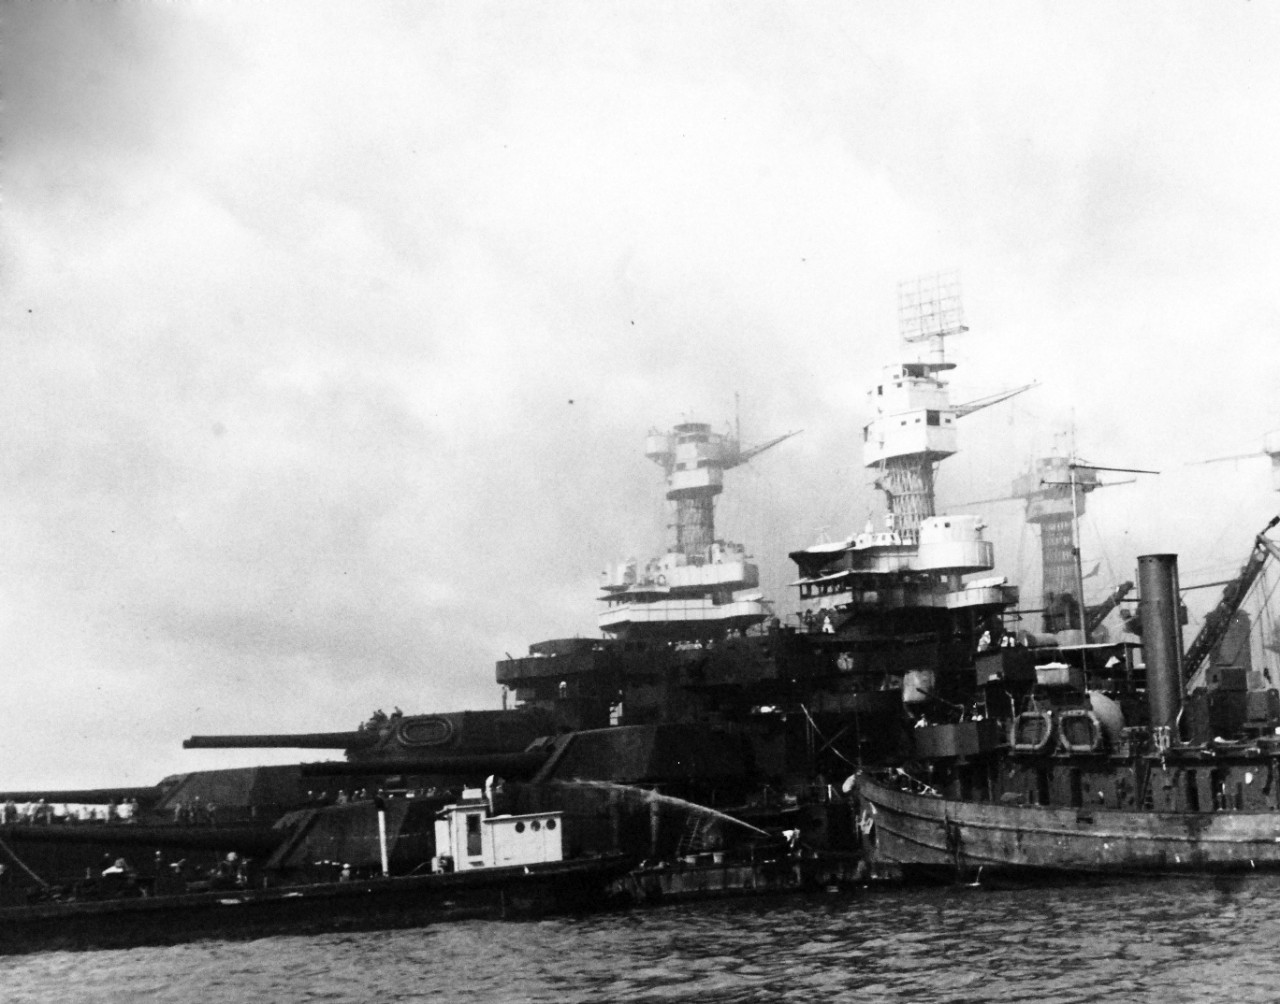 80-G-32475:  Japanese Attack on Pearl Harbor, December 7, 1941.  USS West Virginia (BB 46) and USS Tennessee (BB 43) after the attack.  Official U.S. Navy photograph, now in the collections of the National Archives.  (9/15/15).